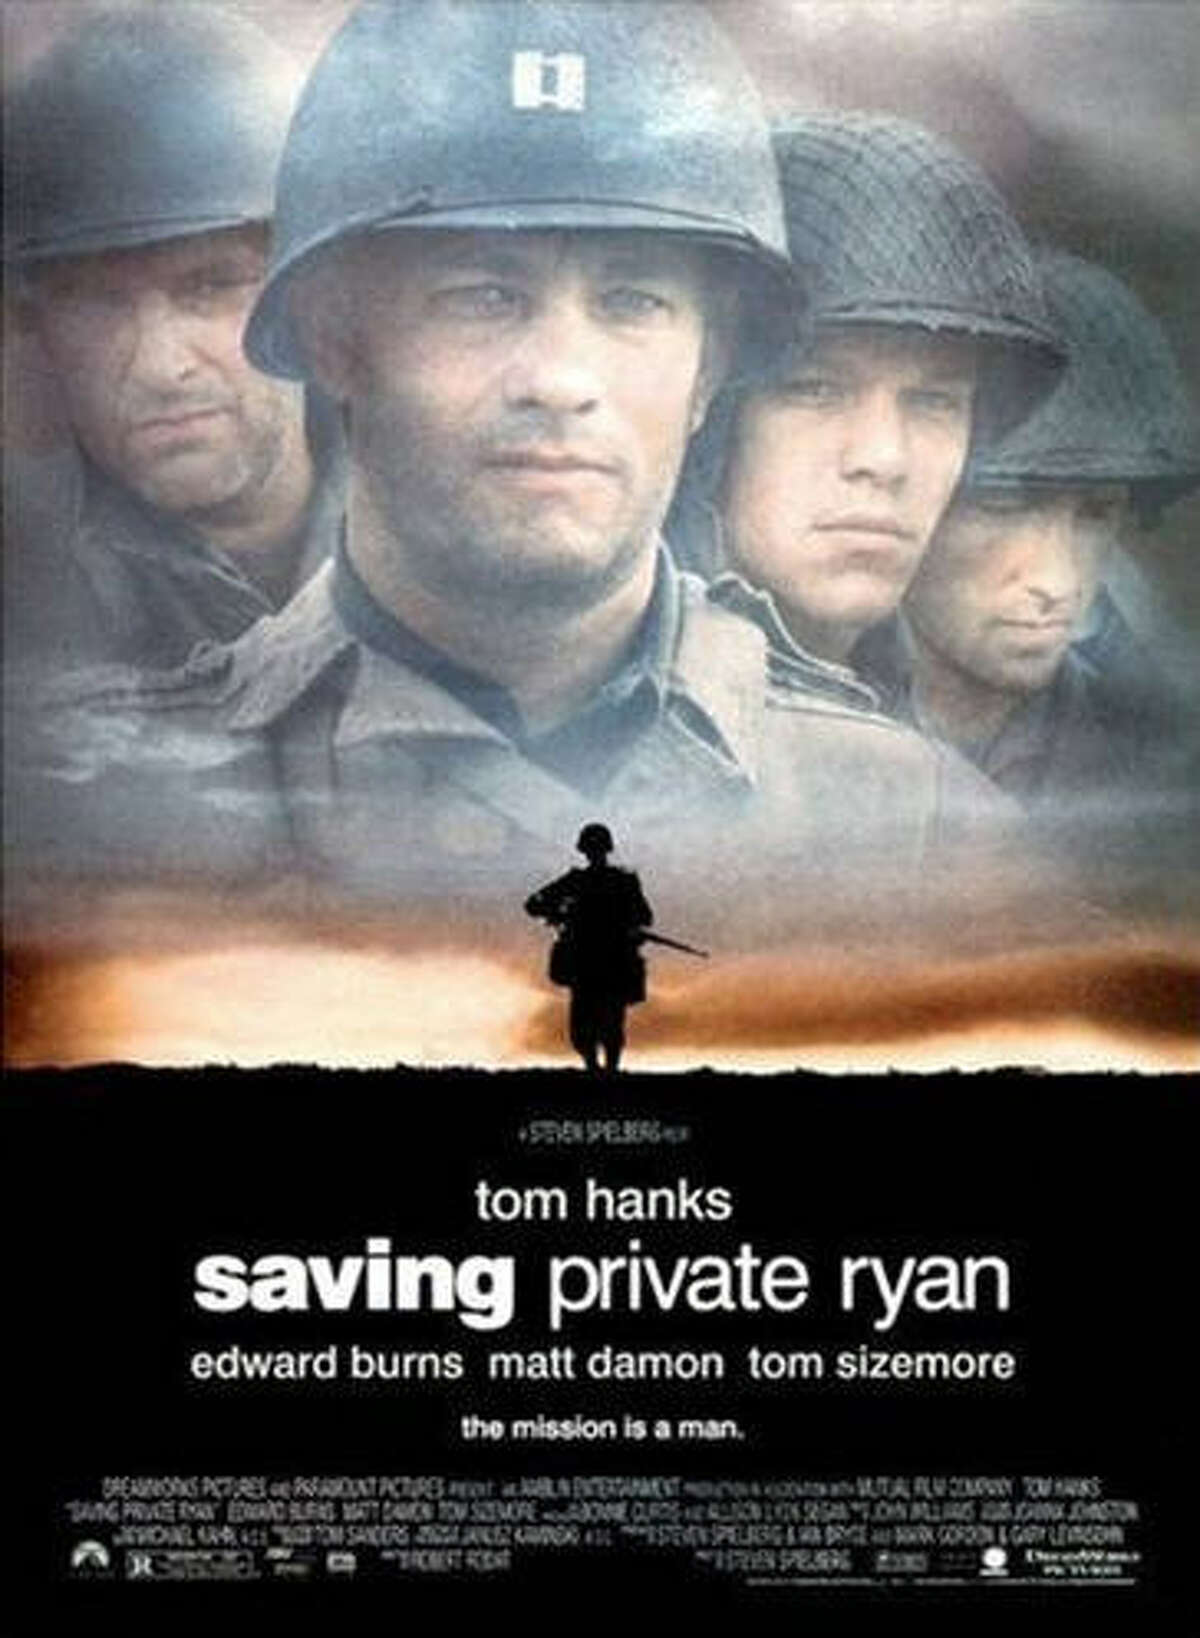 "Saving Private Ryan" Plot: A small but elite band of soldiers searches the European countryside during World War II for a private who has been given a free pass home from the cruelty of war.  American Themes: Waving the Flag, Loyalty to Friends, Fighting for Your Country, The Underdog, Winning Dubya-Dubya-Two, Fighting for What's Right, Beating the Bad Guys. RottenTomatoes.com Score: 92 percent.